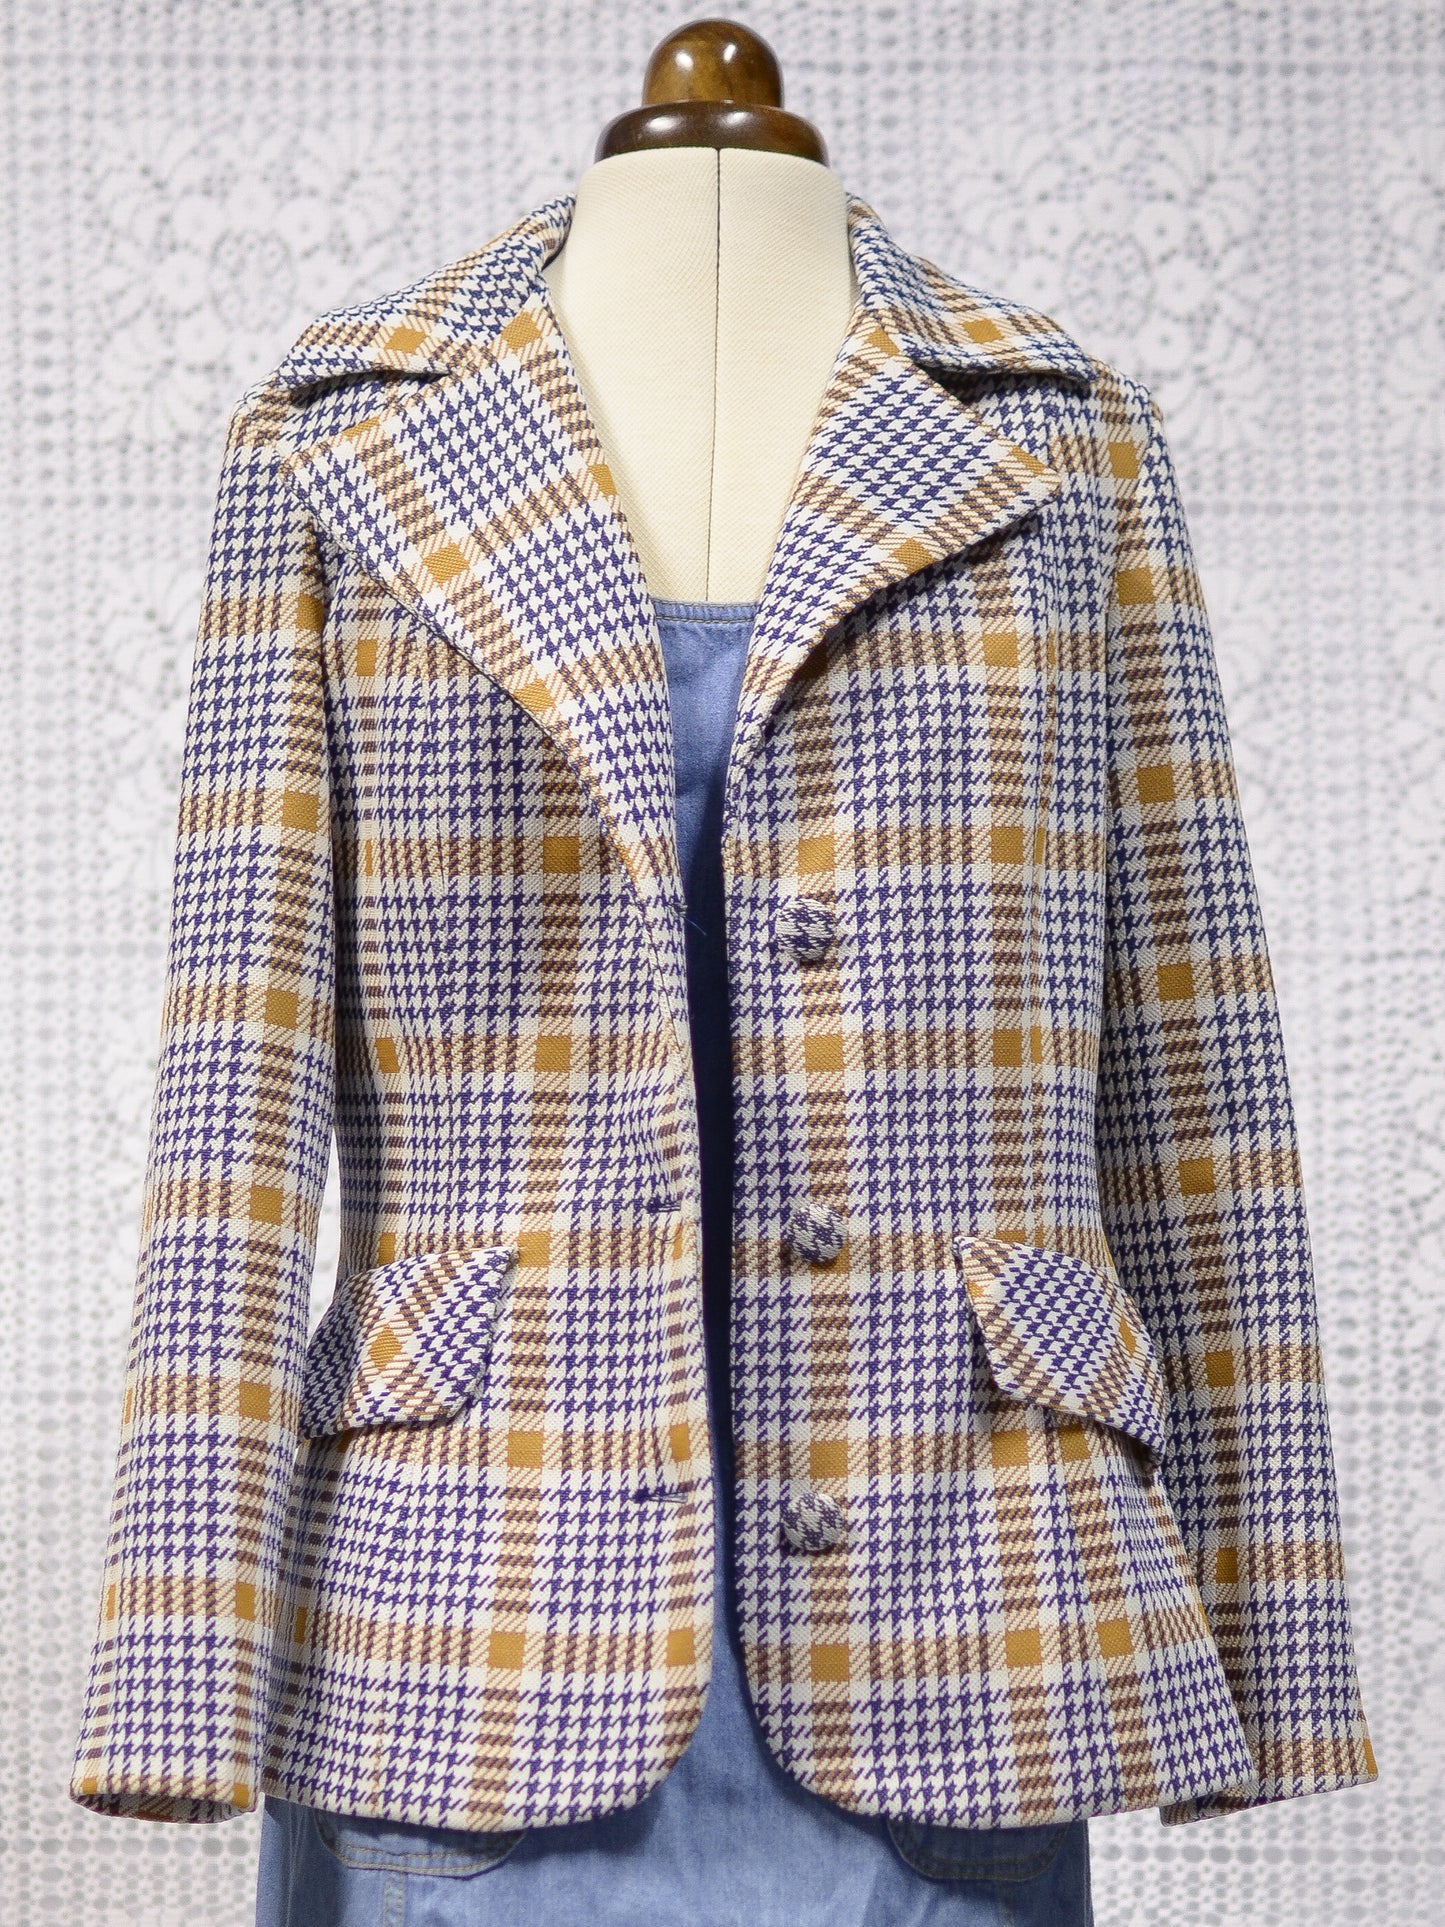 1970s brown and blue check long sleeve jacket